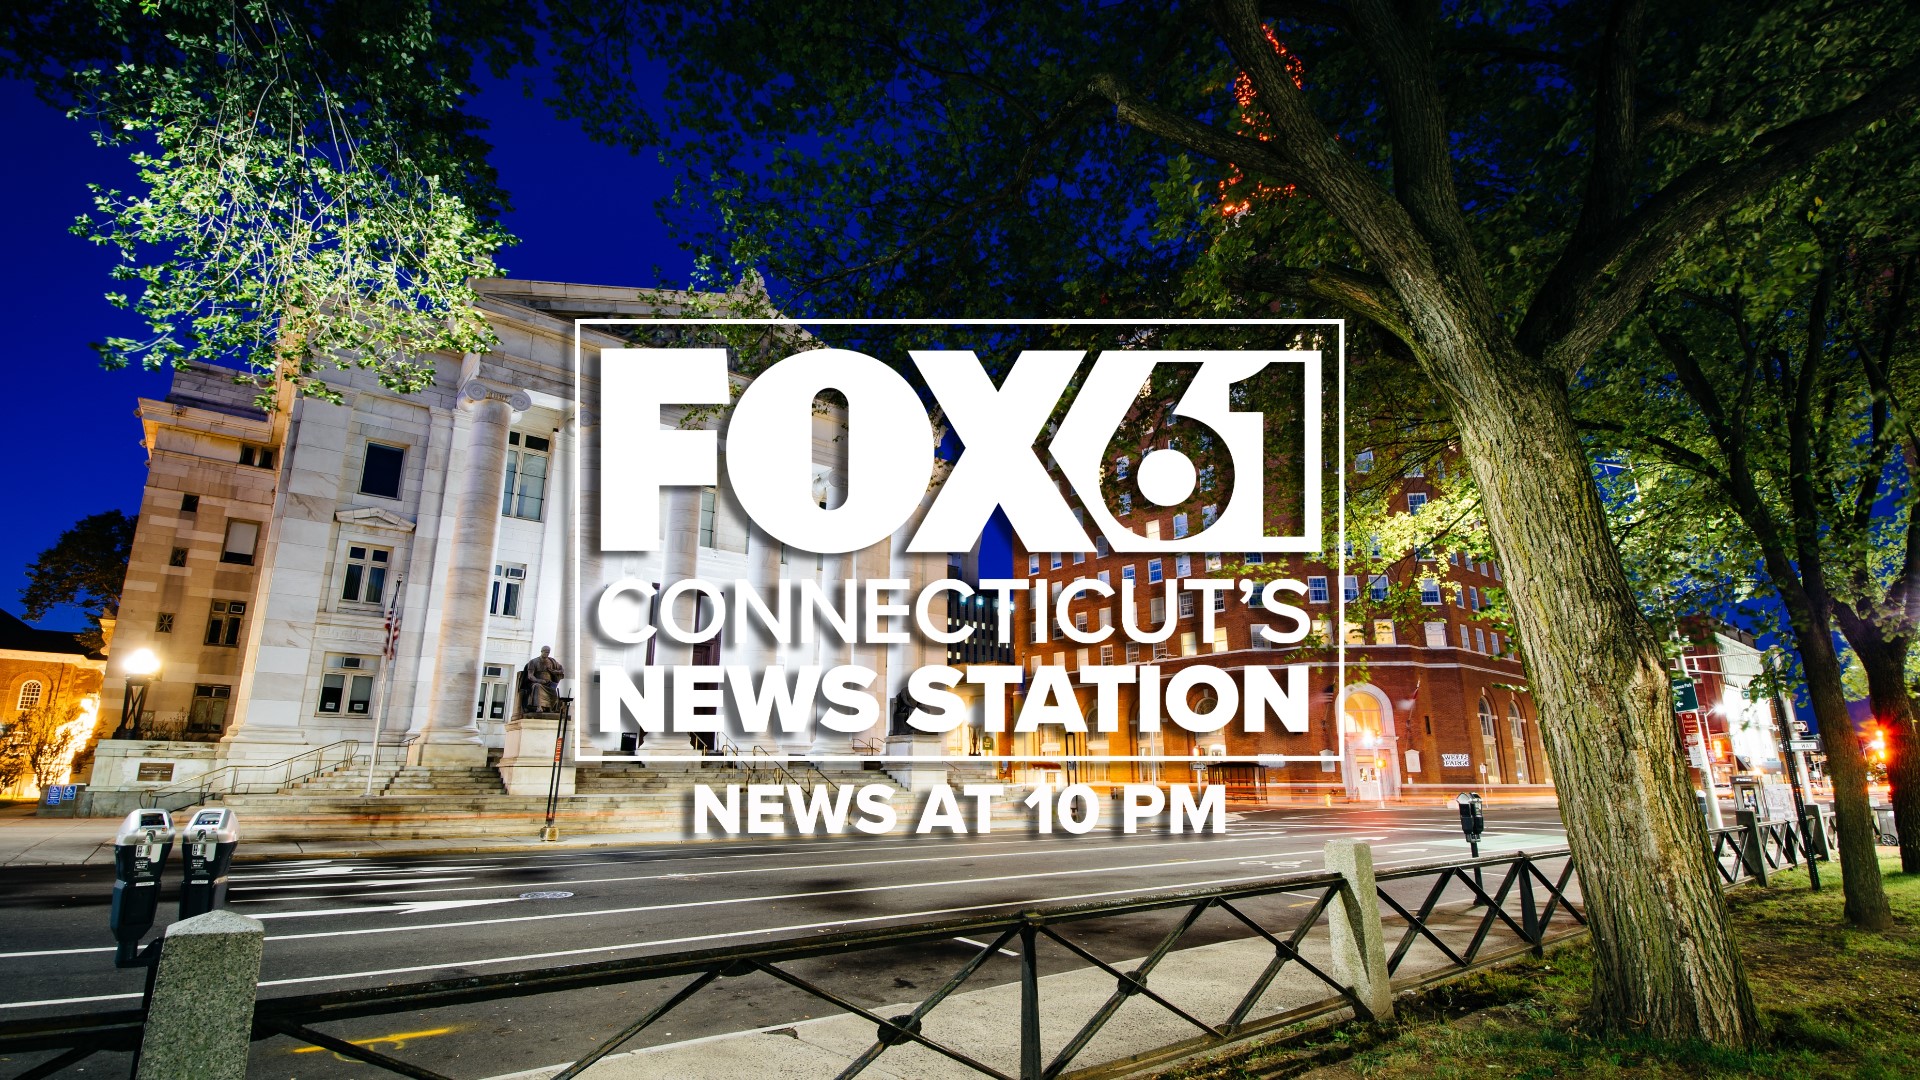 These are the top stories in Connecticut for May 31 at 10 p.m.